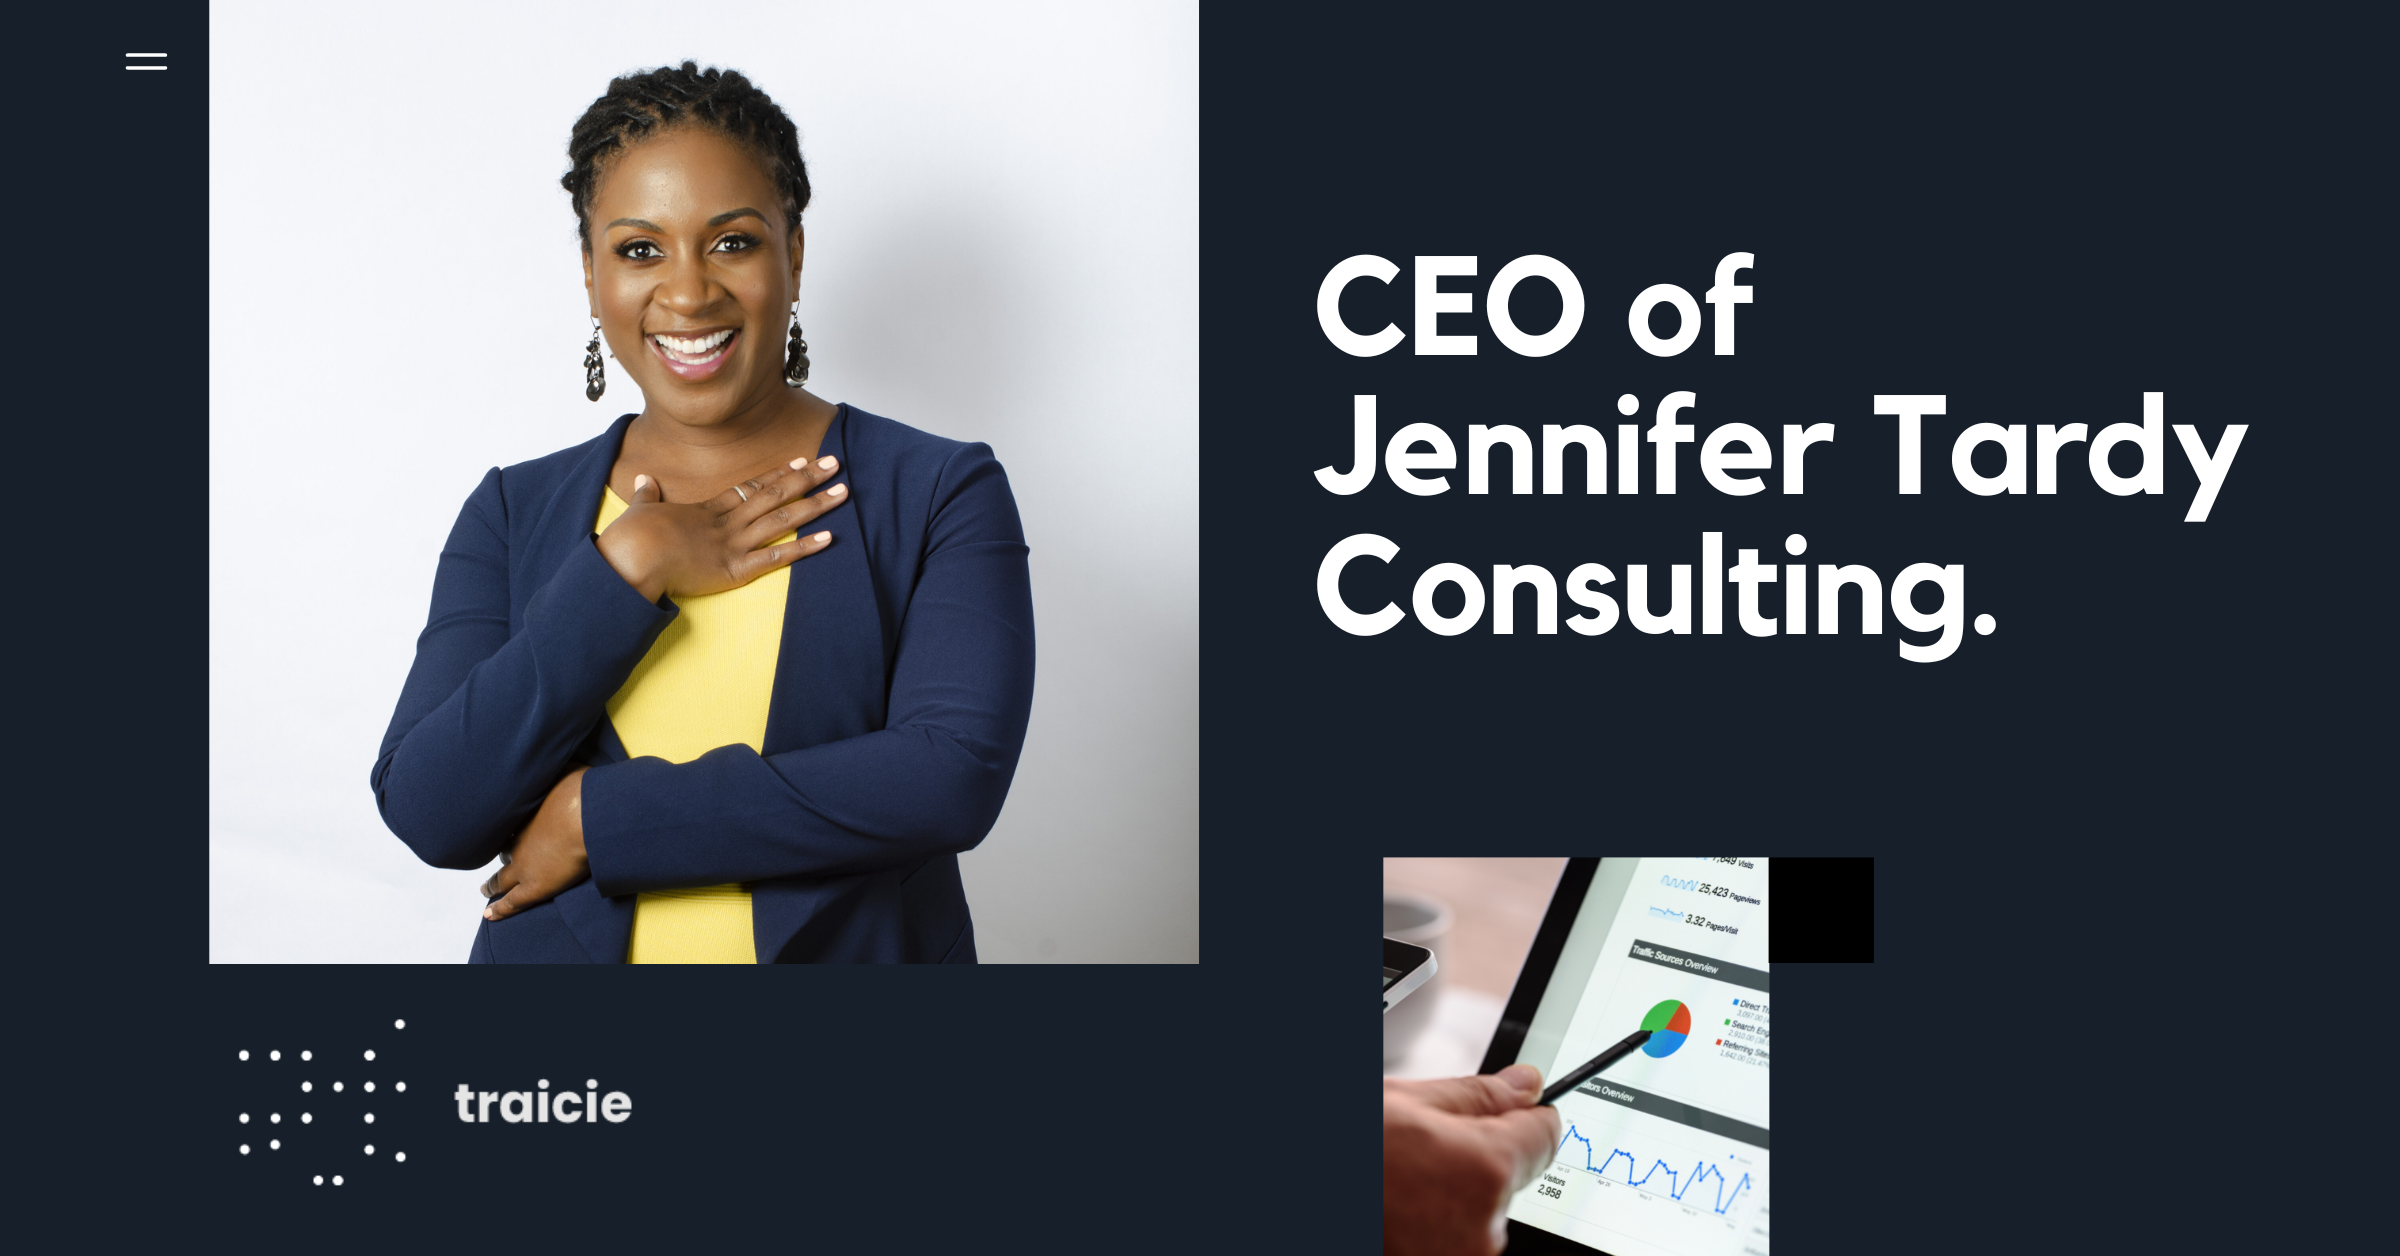 CEO of Jennifer Tardy Consulting.